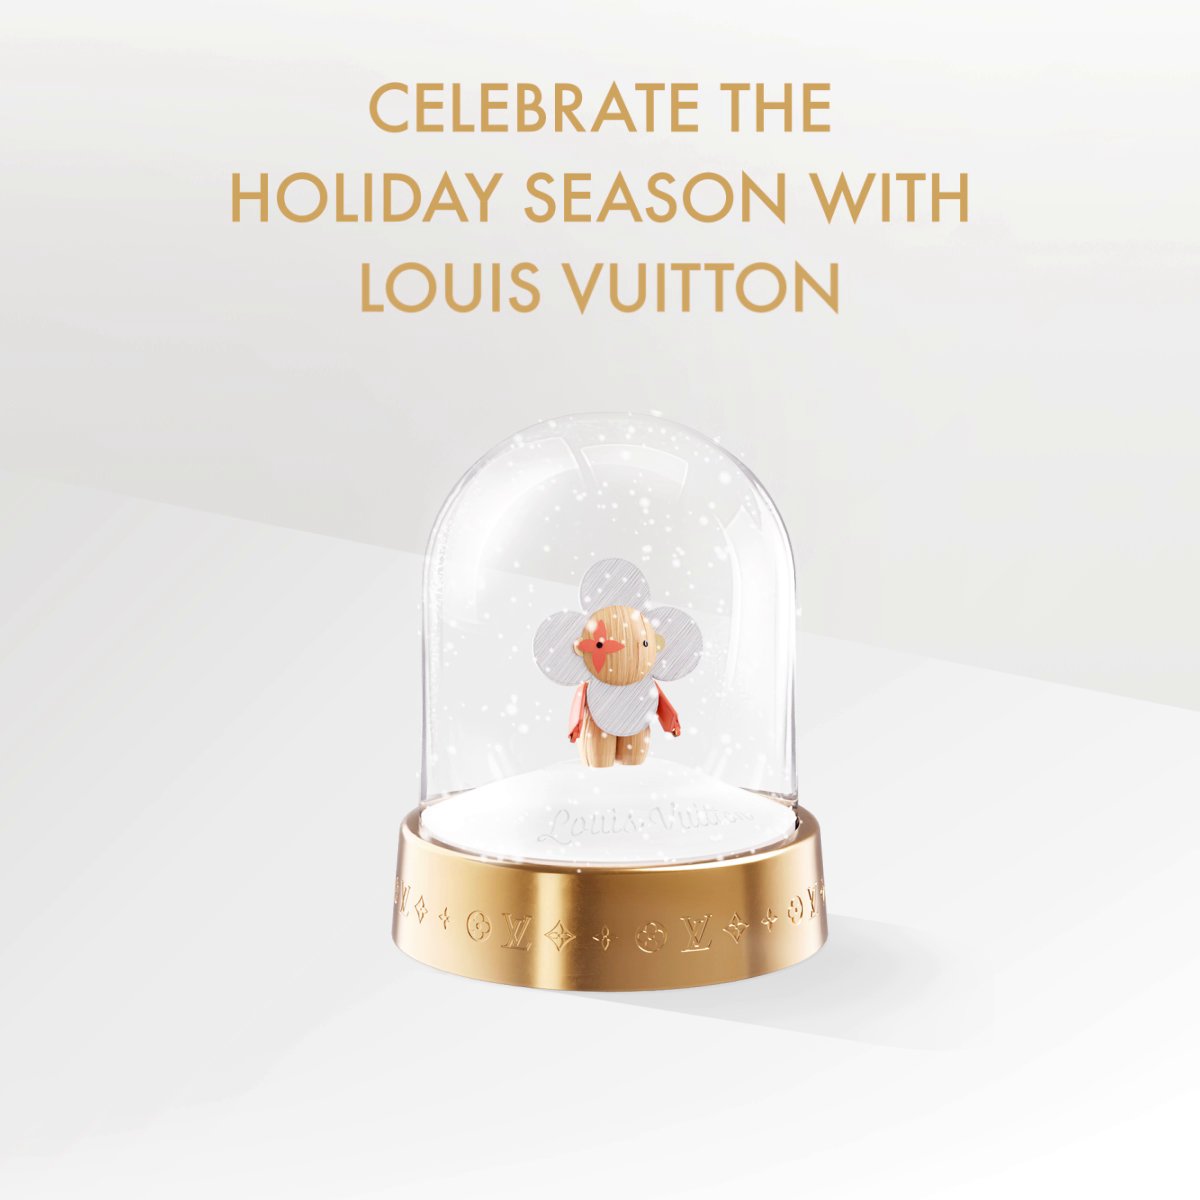 Louis Vuitton on X: Spread the holiday spirit. Share your holiday  greetings with a personalized e-card from Louis Vuitton at    / X